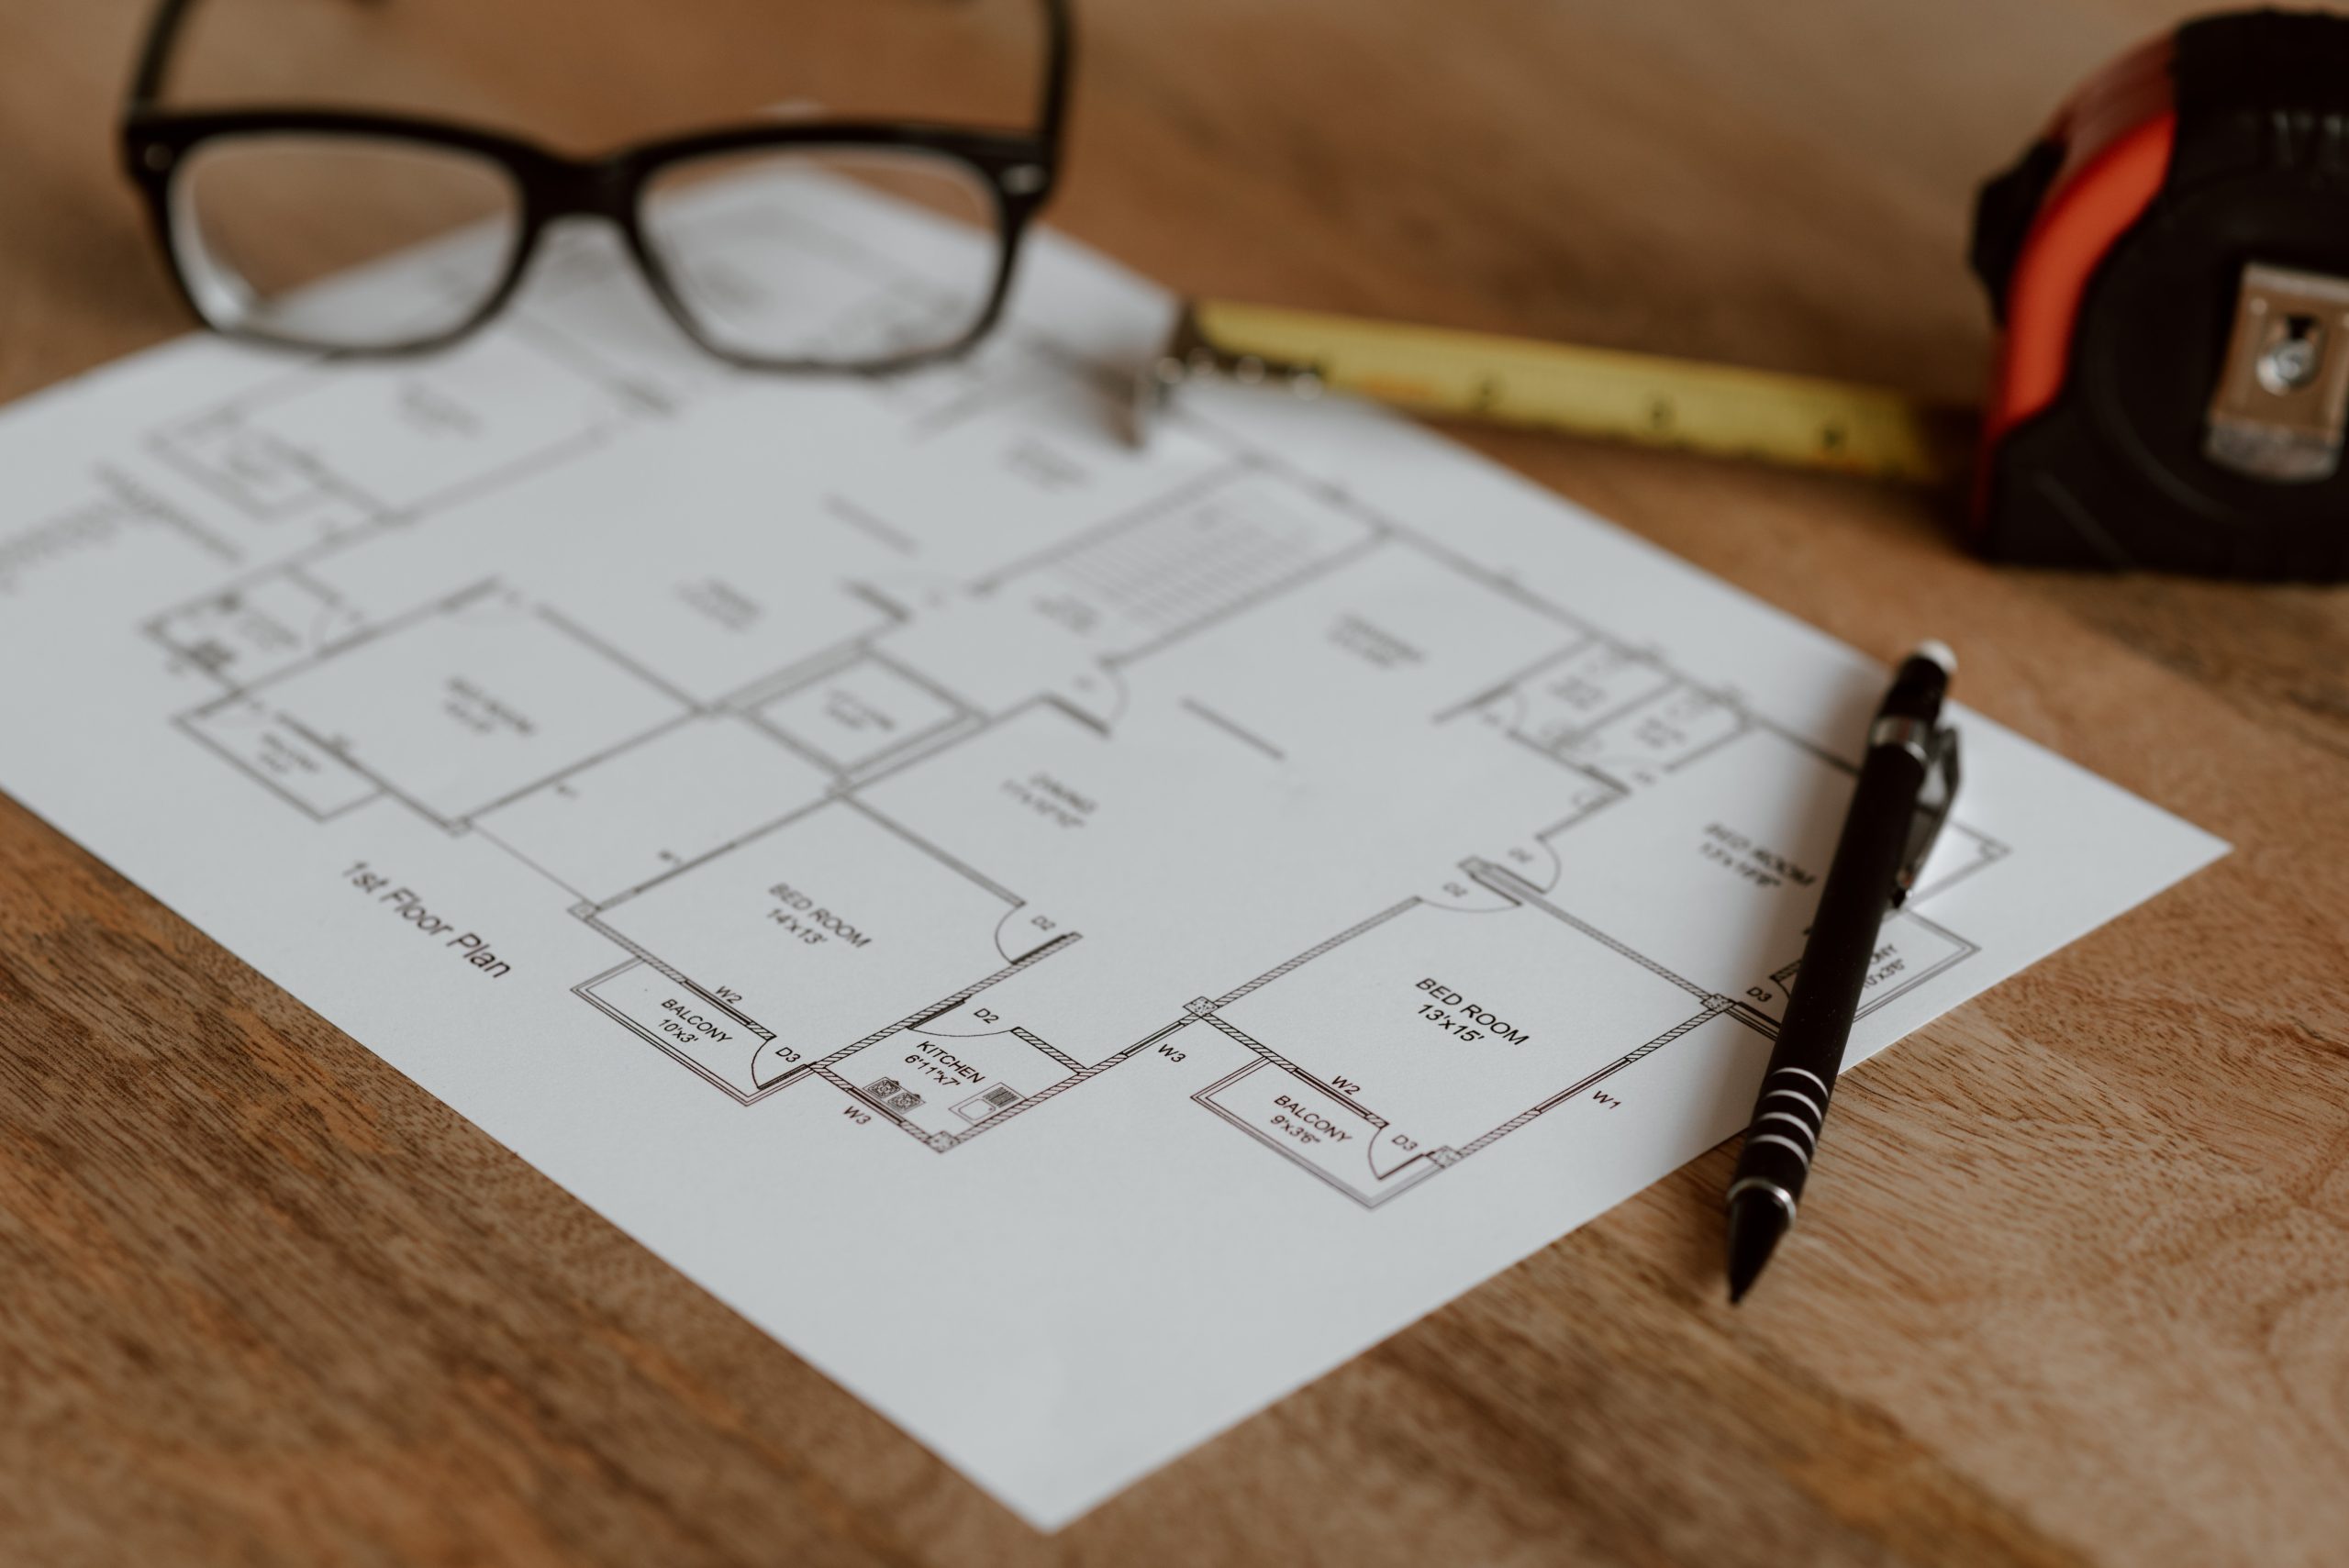 Floor plan on table with a pair of glasses, a pen and a tape measure.